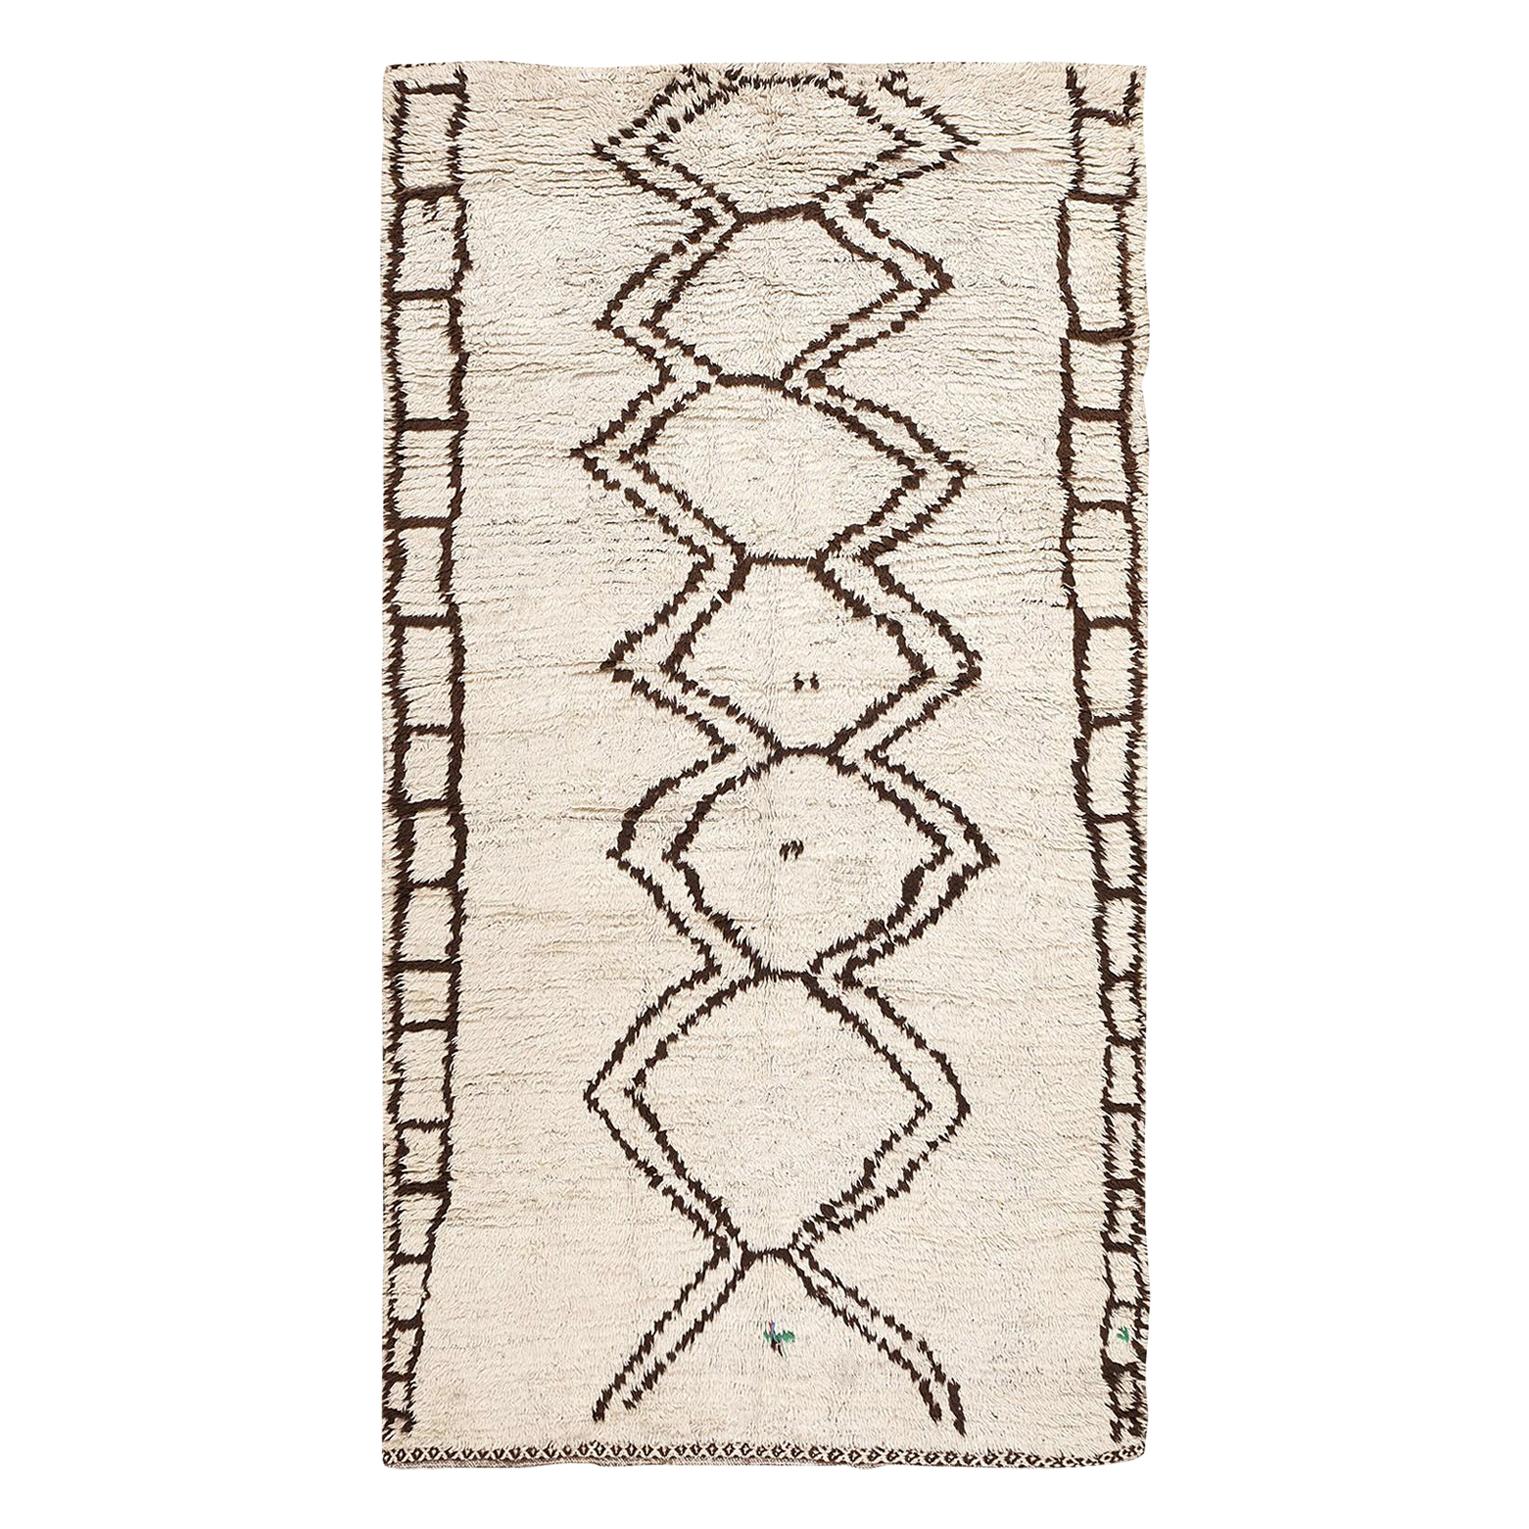 Moroccan Beni Ourain Berber Rug. Size: 4 ft 3 in x 8 ft